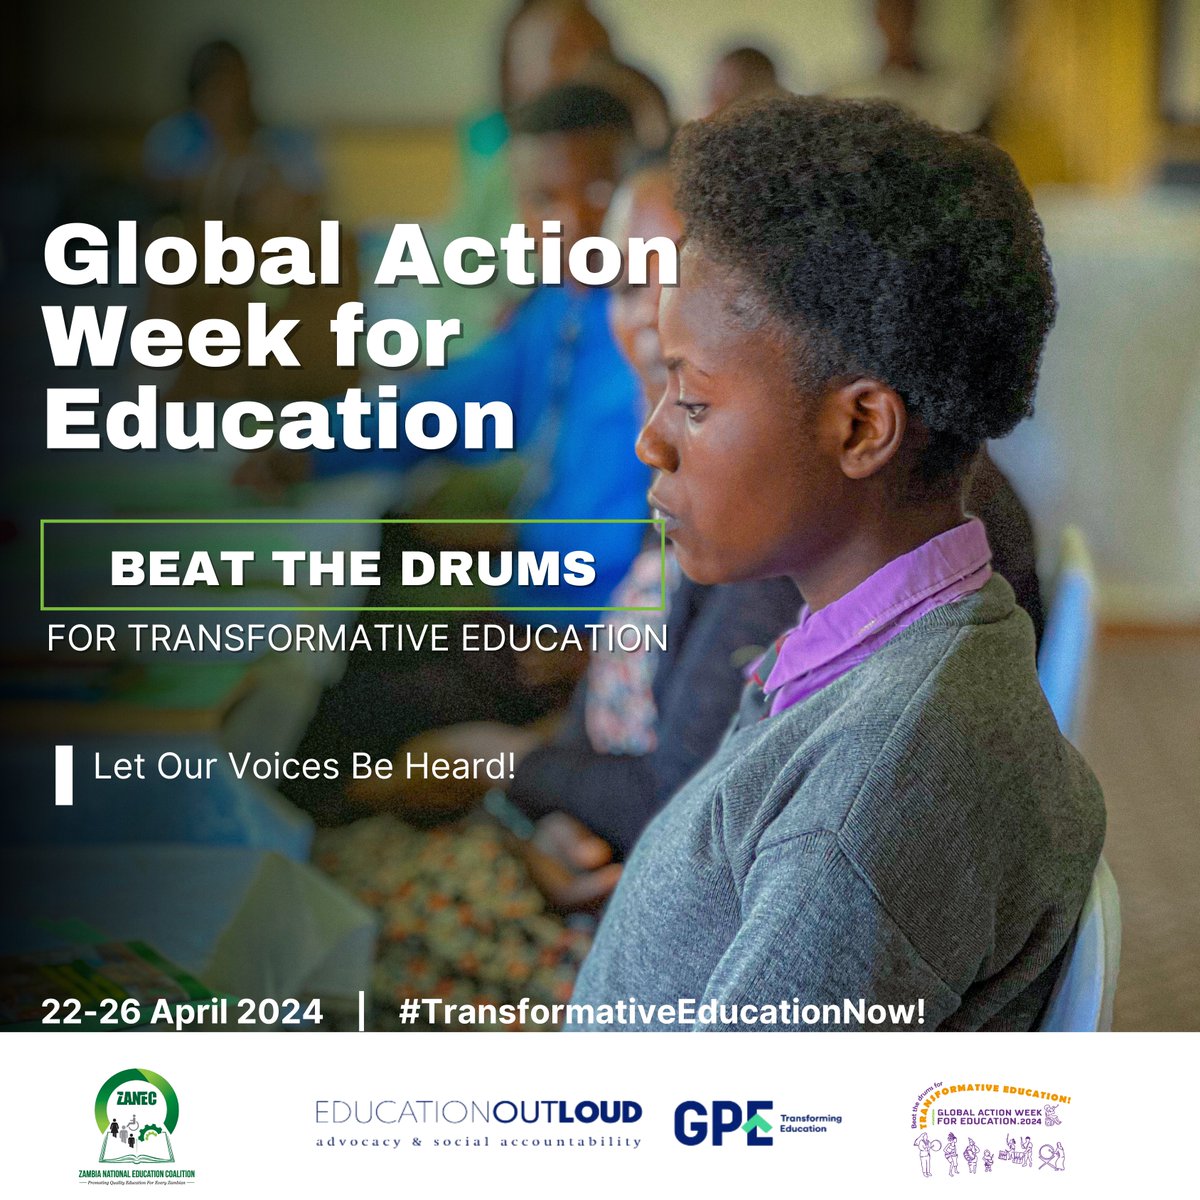 Beat the drums for quality public, transformative education. Let our diverse voices be heard! #TransformativeEducationNow #EducationForAll #NoOneLeftBehind #gawe2024